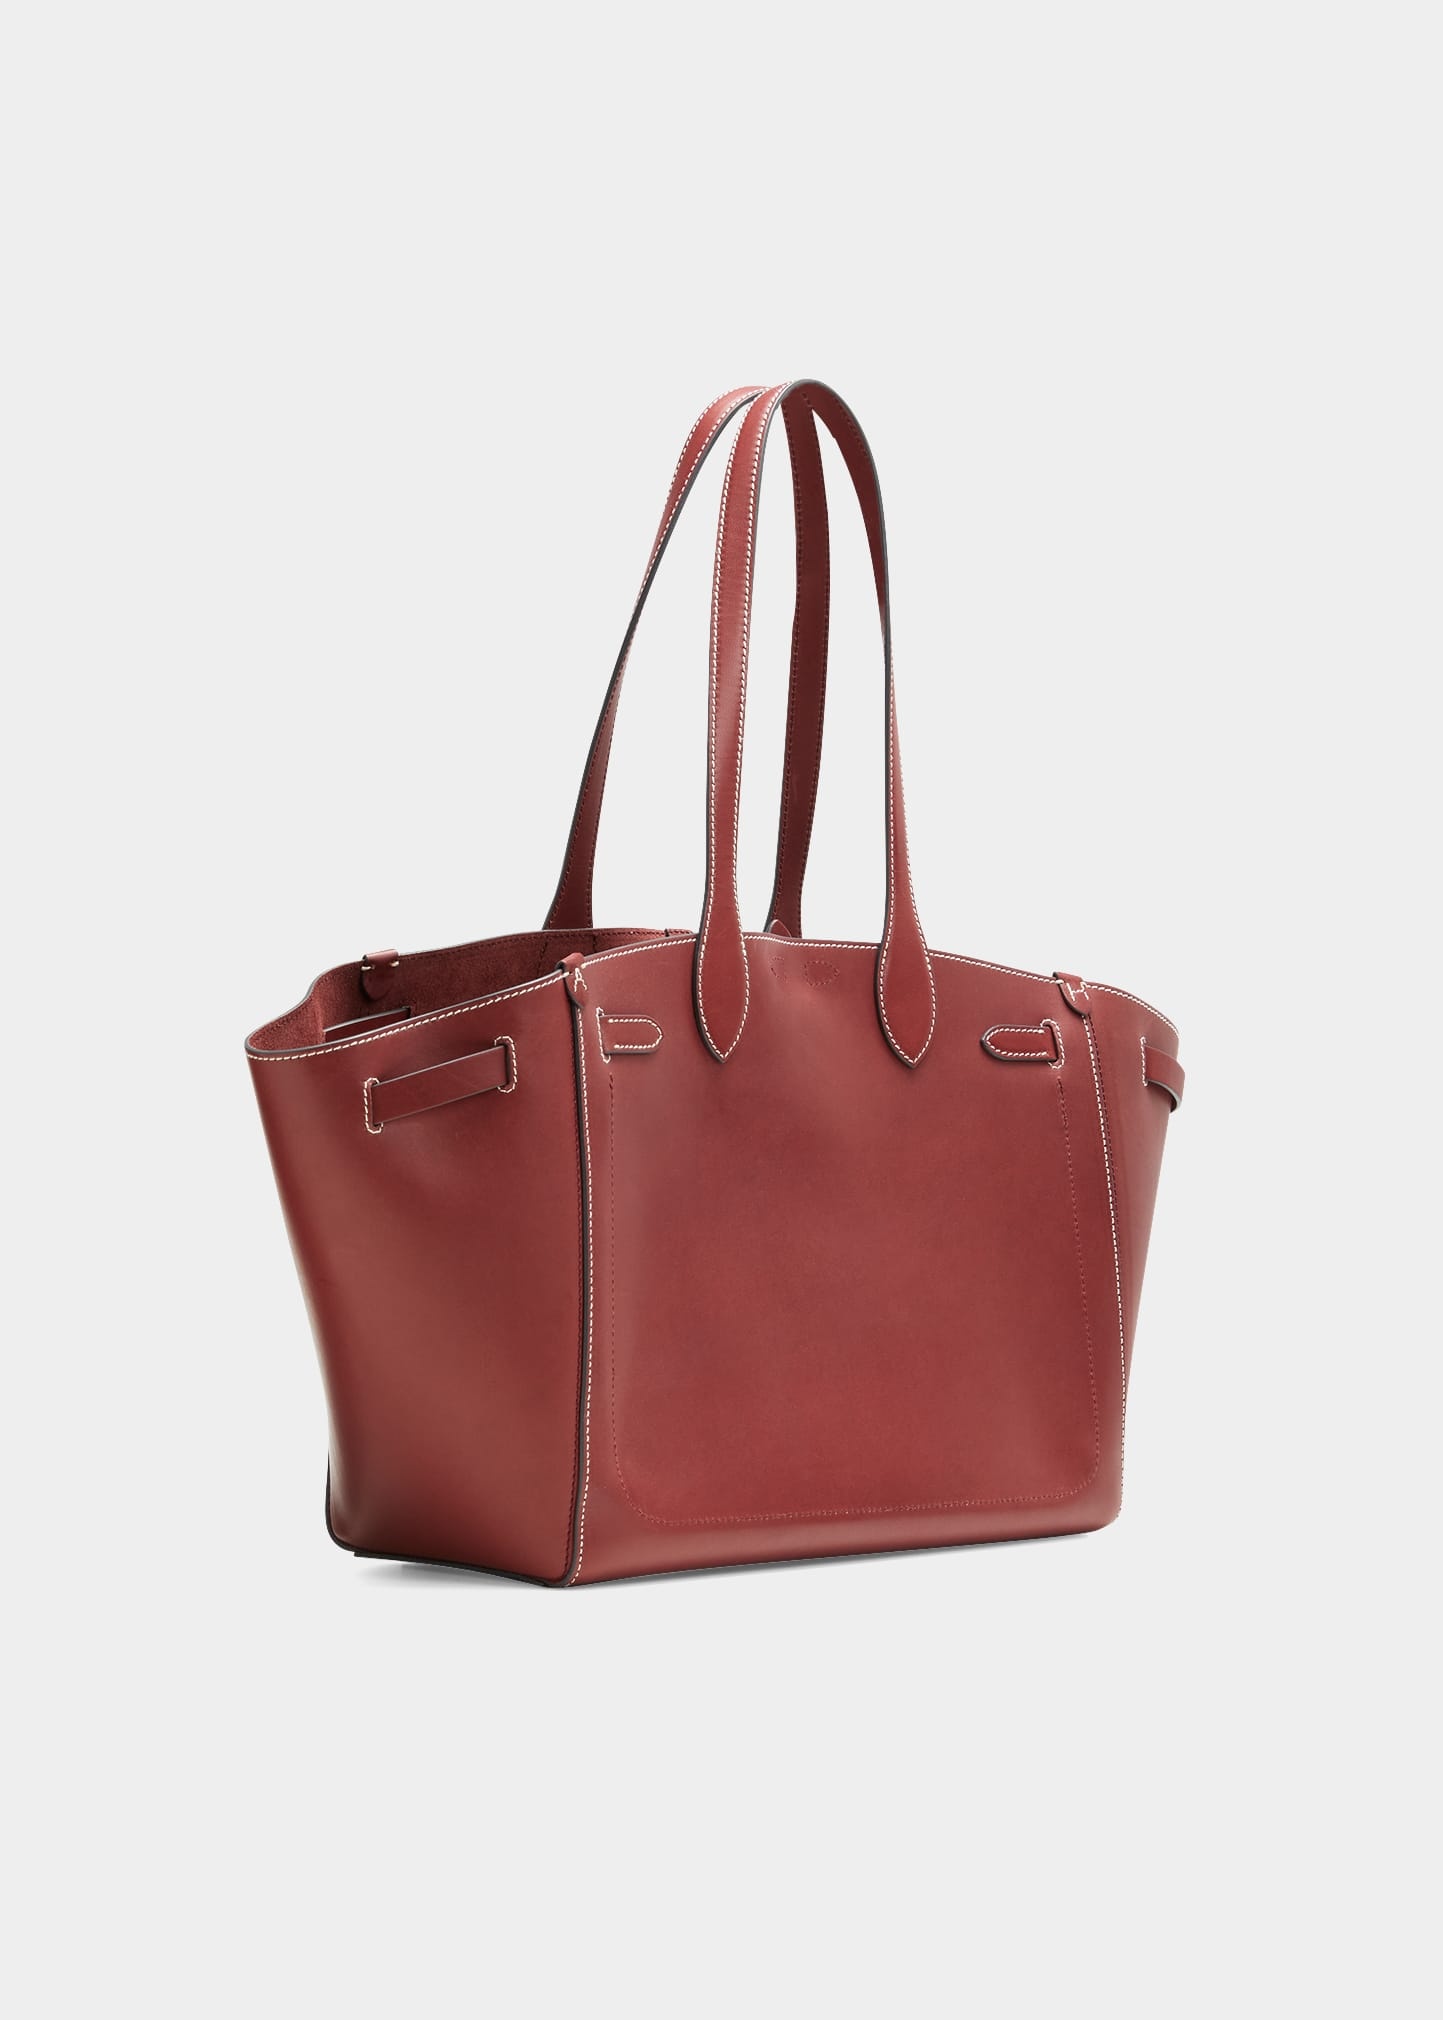 Return to Nature Compostable Leather Tote Bag - 3